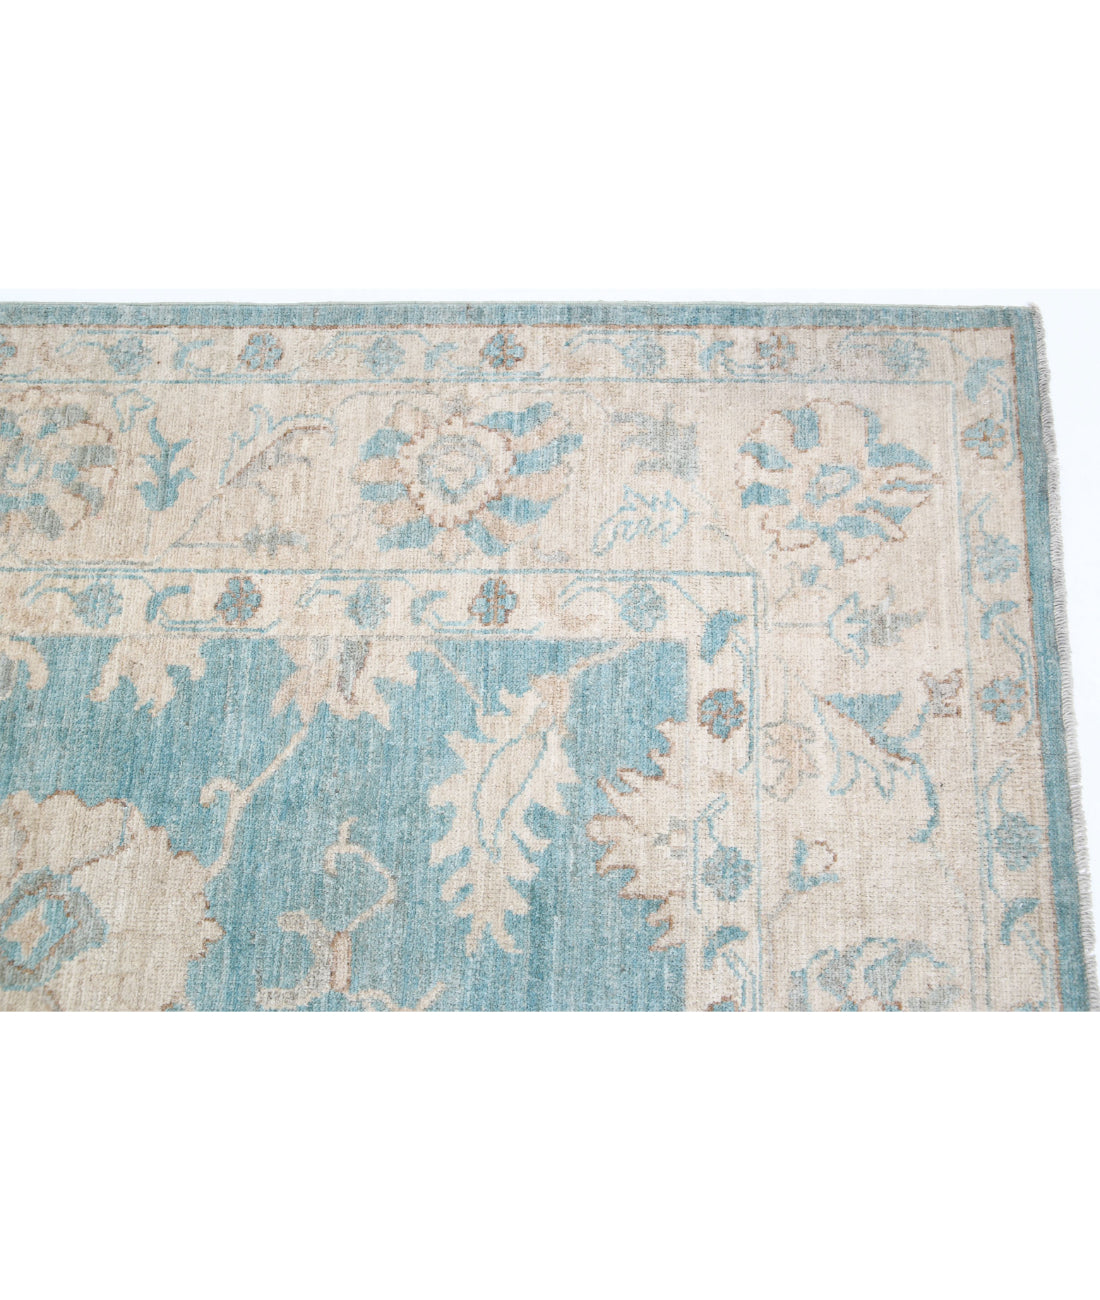 Hand Knotted Oushak Wool Rug - 7'11'' x 9'5'' 7'11'' x 9'5'' (238 X 283) / Green / Ivory